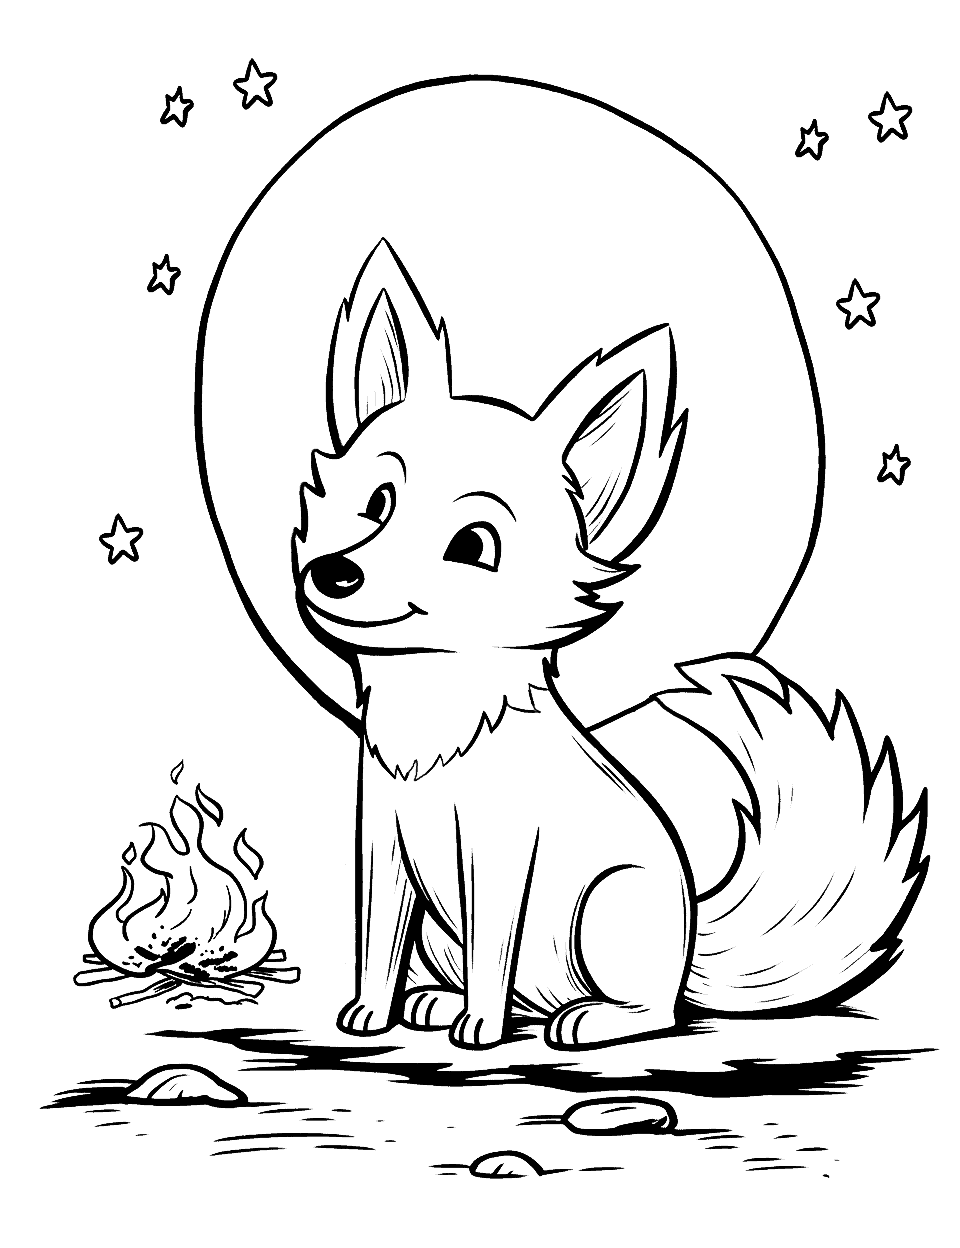 Fox's Campfire Night Coloring Page - Under the stars, a fox by a warm campfire.